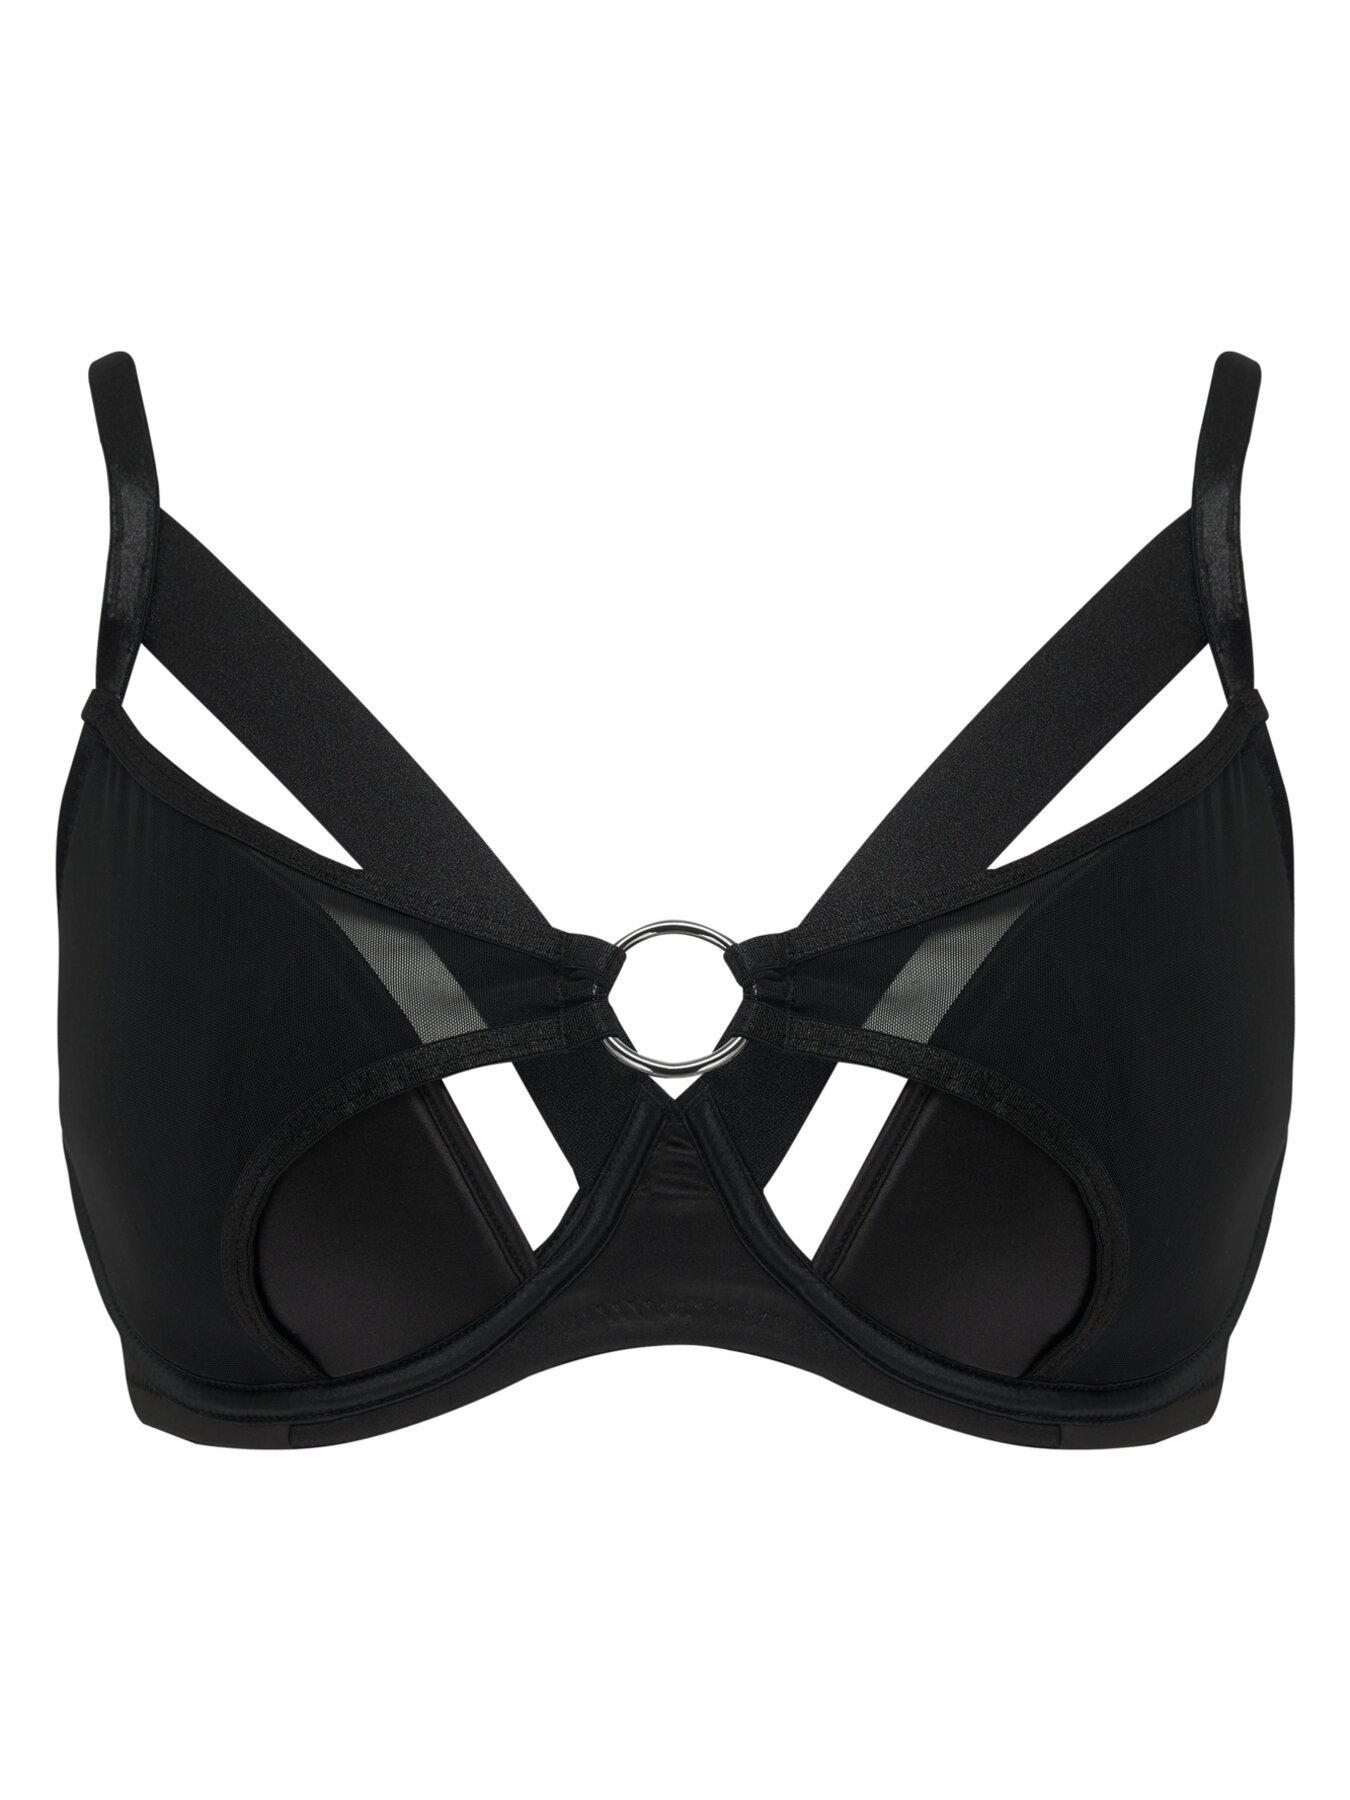 Smooth Underwired Moulded Bra - Black